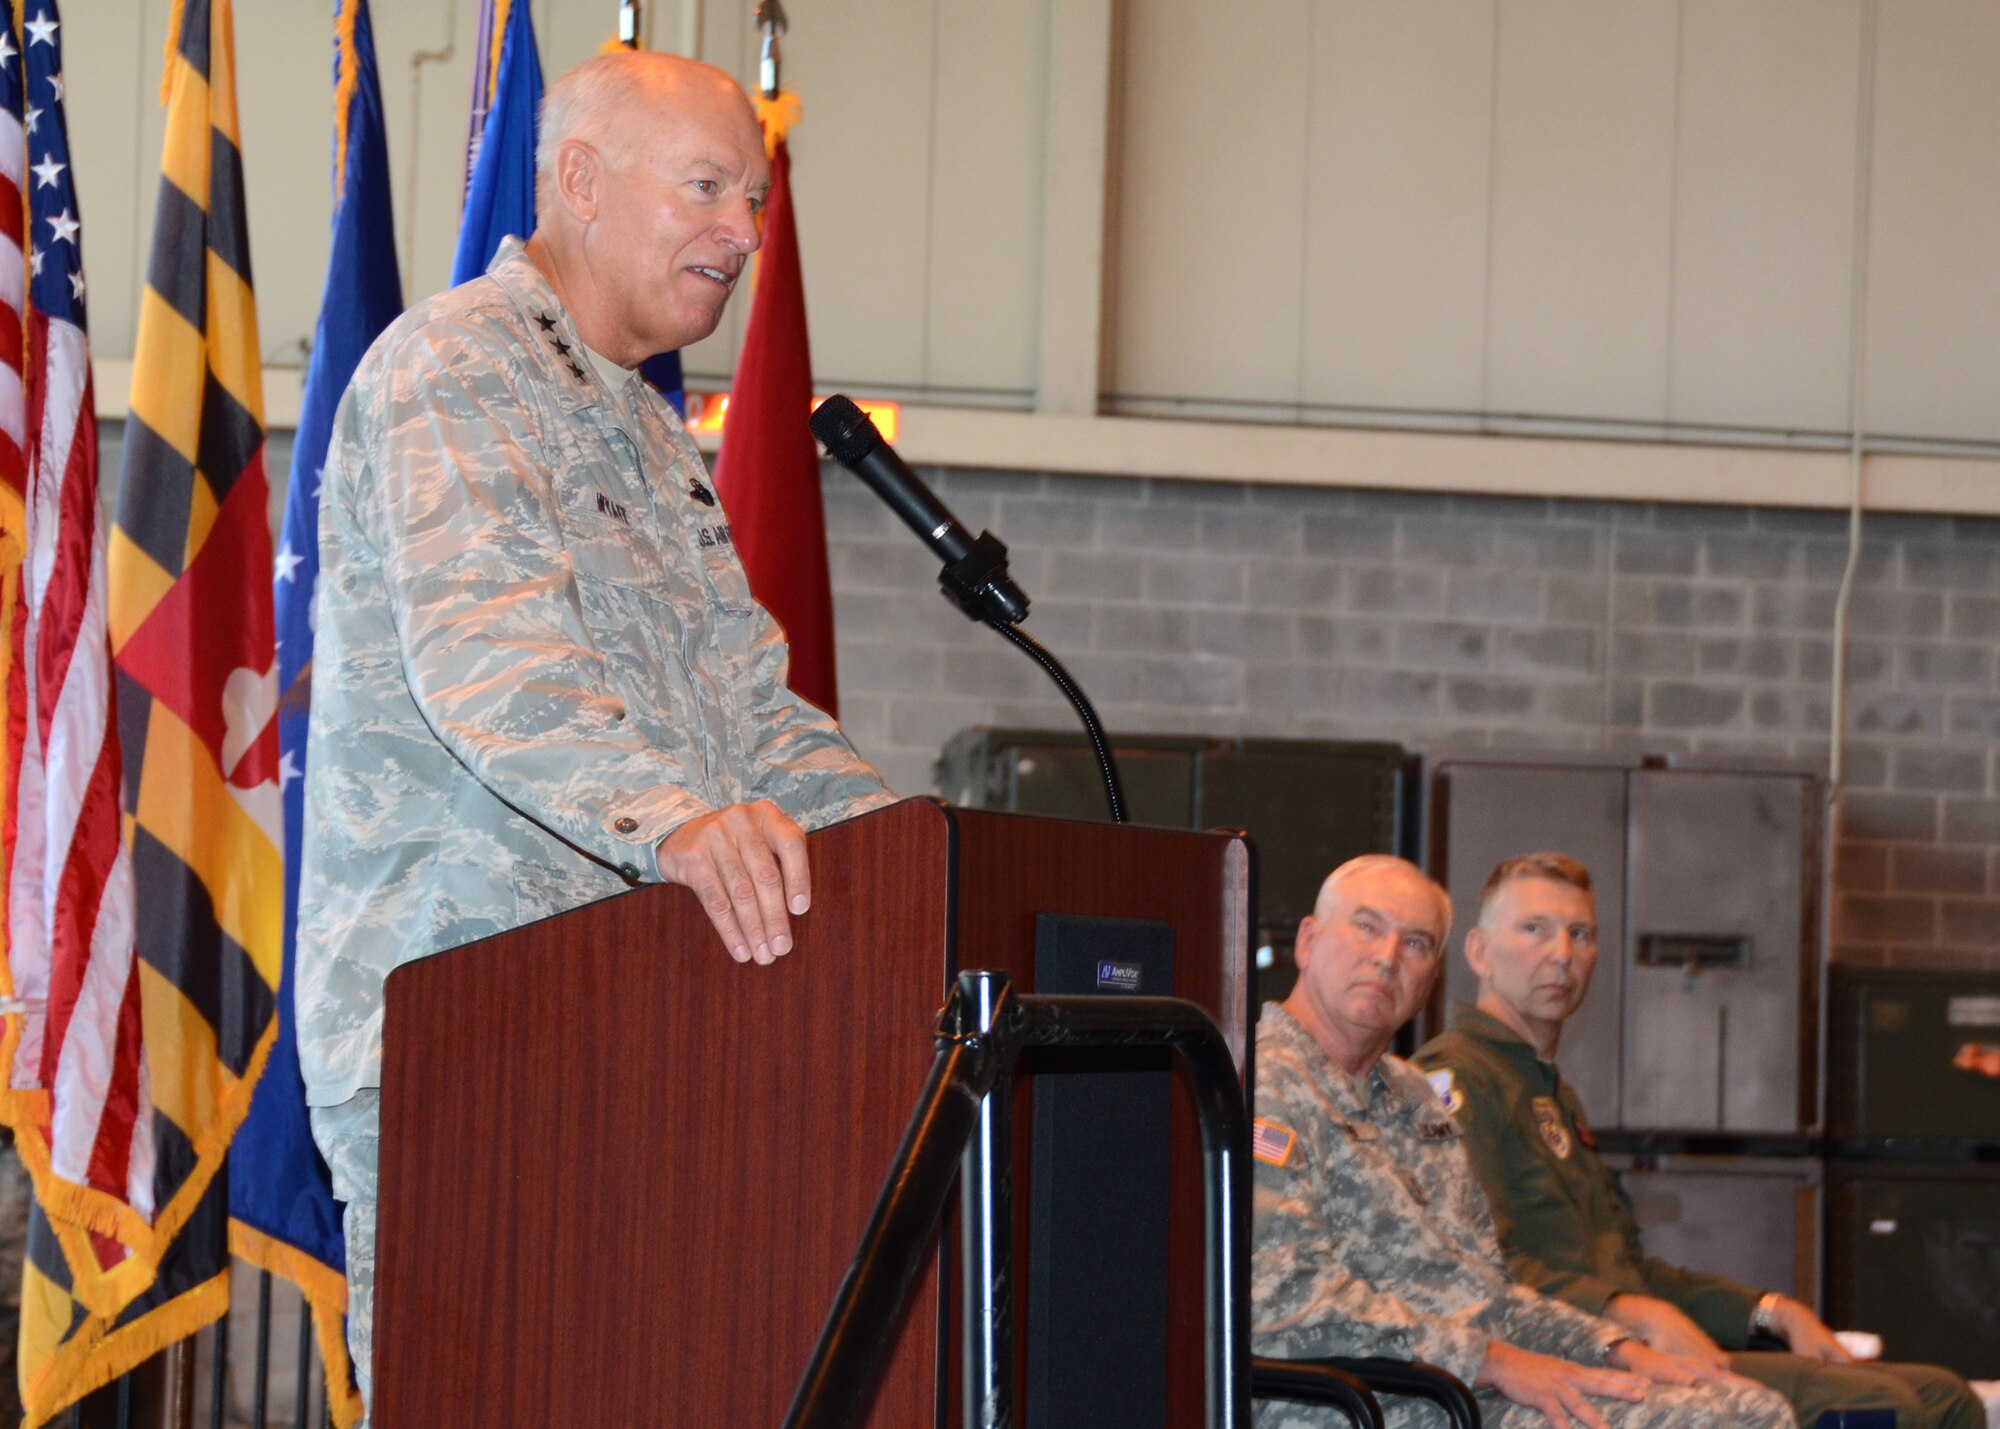 Lt. Gen. Harry M. Wyatt III, Director, Air National Guard, speaks during an arrival ceremony for the new C-27J Spartan, August 13, 2011 at Warfield Air National Guard Base, Baltimore, MD while (L-R) U.S. Army Maj. Gen.  James A. Atkins, Adjutant General and Col. Thomas E. Hans, commander 135th Airlift Group, watch.  The ceremony marks the transition to the C-27J Spartan from the C-130J Hercules, which the 175th Wing first dedicated in 1999.  (U.S. Air Force photo by Staff Sgt. Benjamin Hughes/RELEASED)